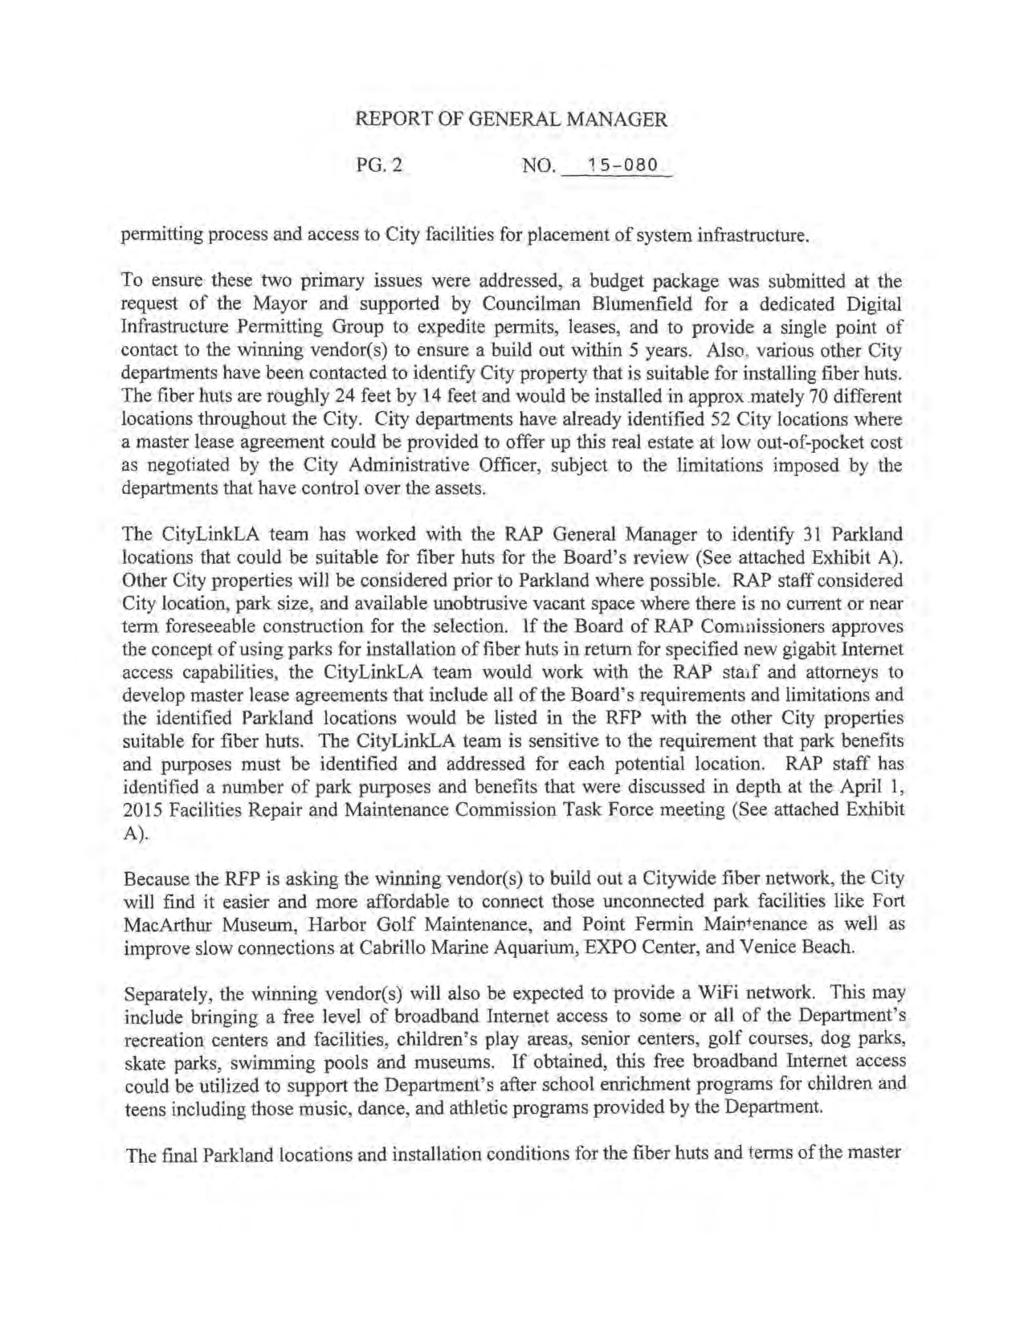 REPORT OF GENERAL MANAGER PG.2 NO. 1_5_-_0_8_0_ permitting process and access to City facilities for placement of system infrastructure.